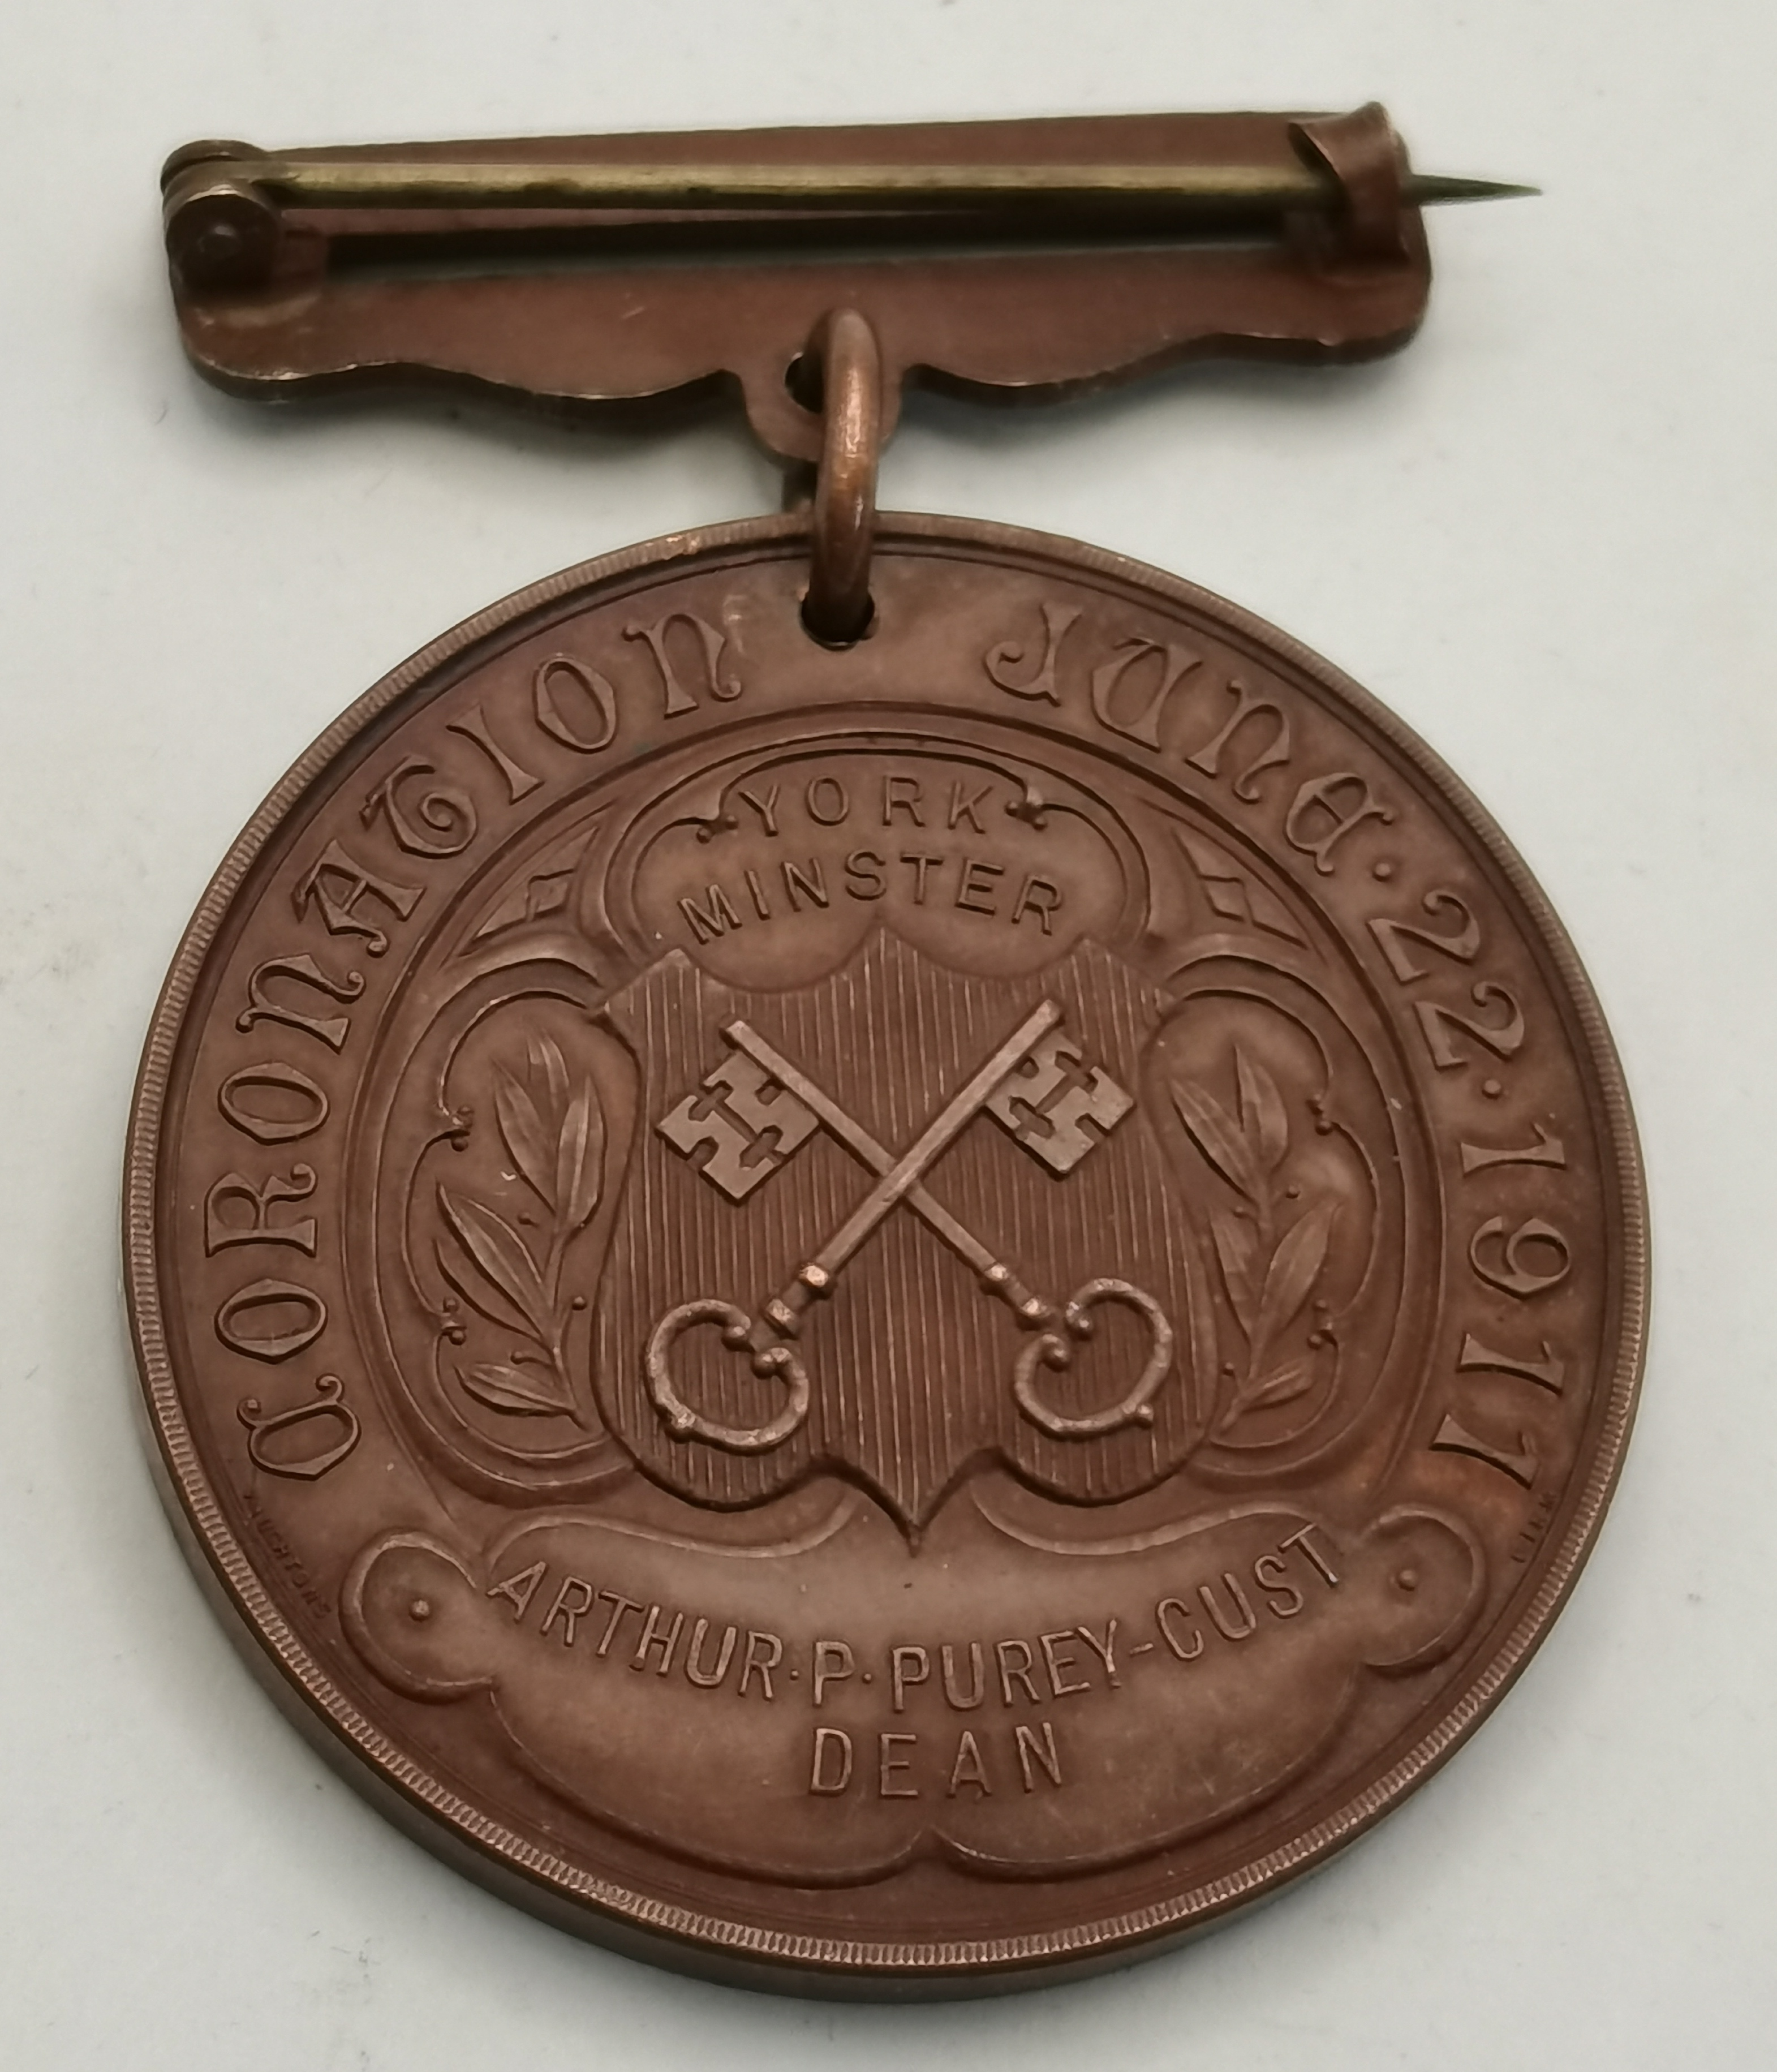 Boxed White metal commemorative Medal Victoria and x2 York Minster Comm. Medals - Image 6 of 9